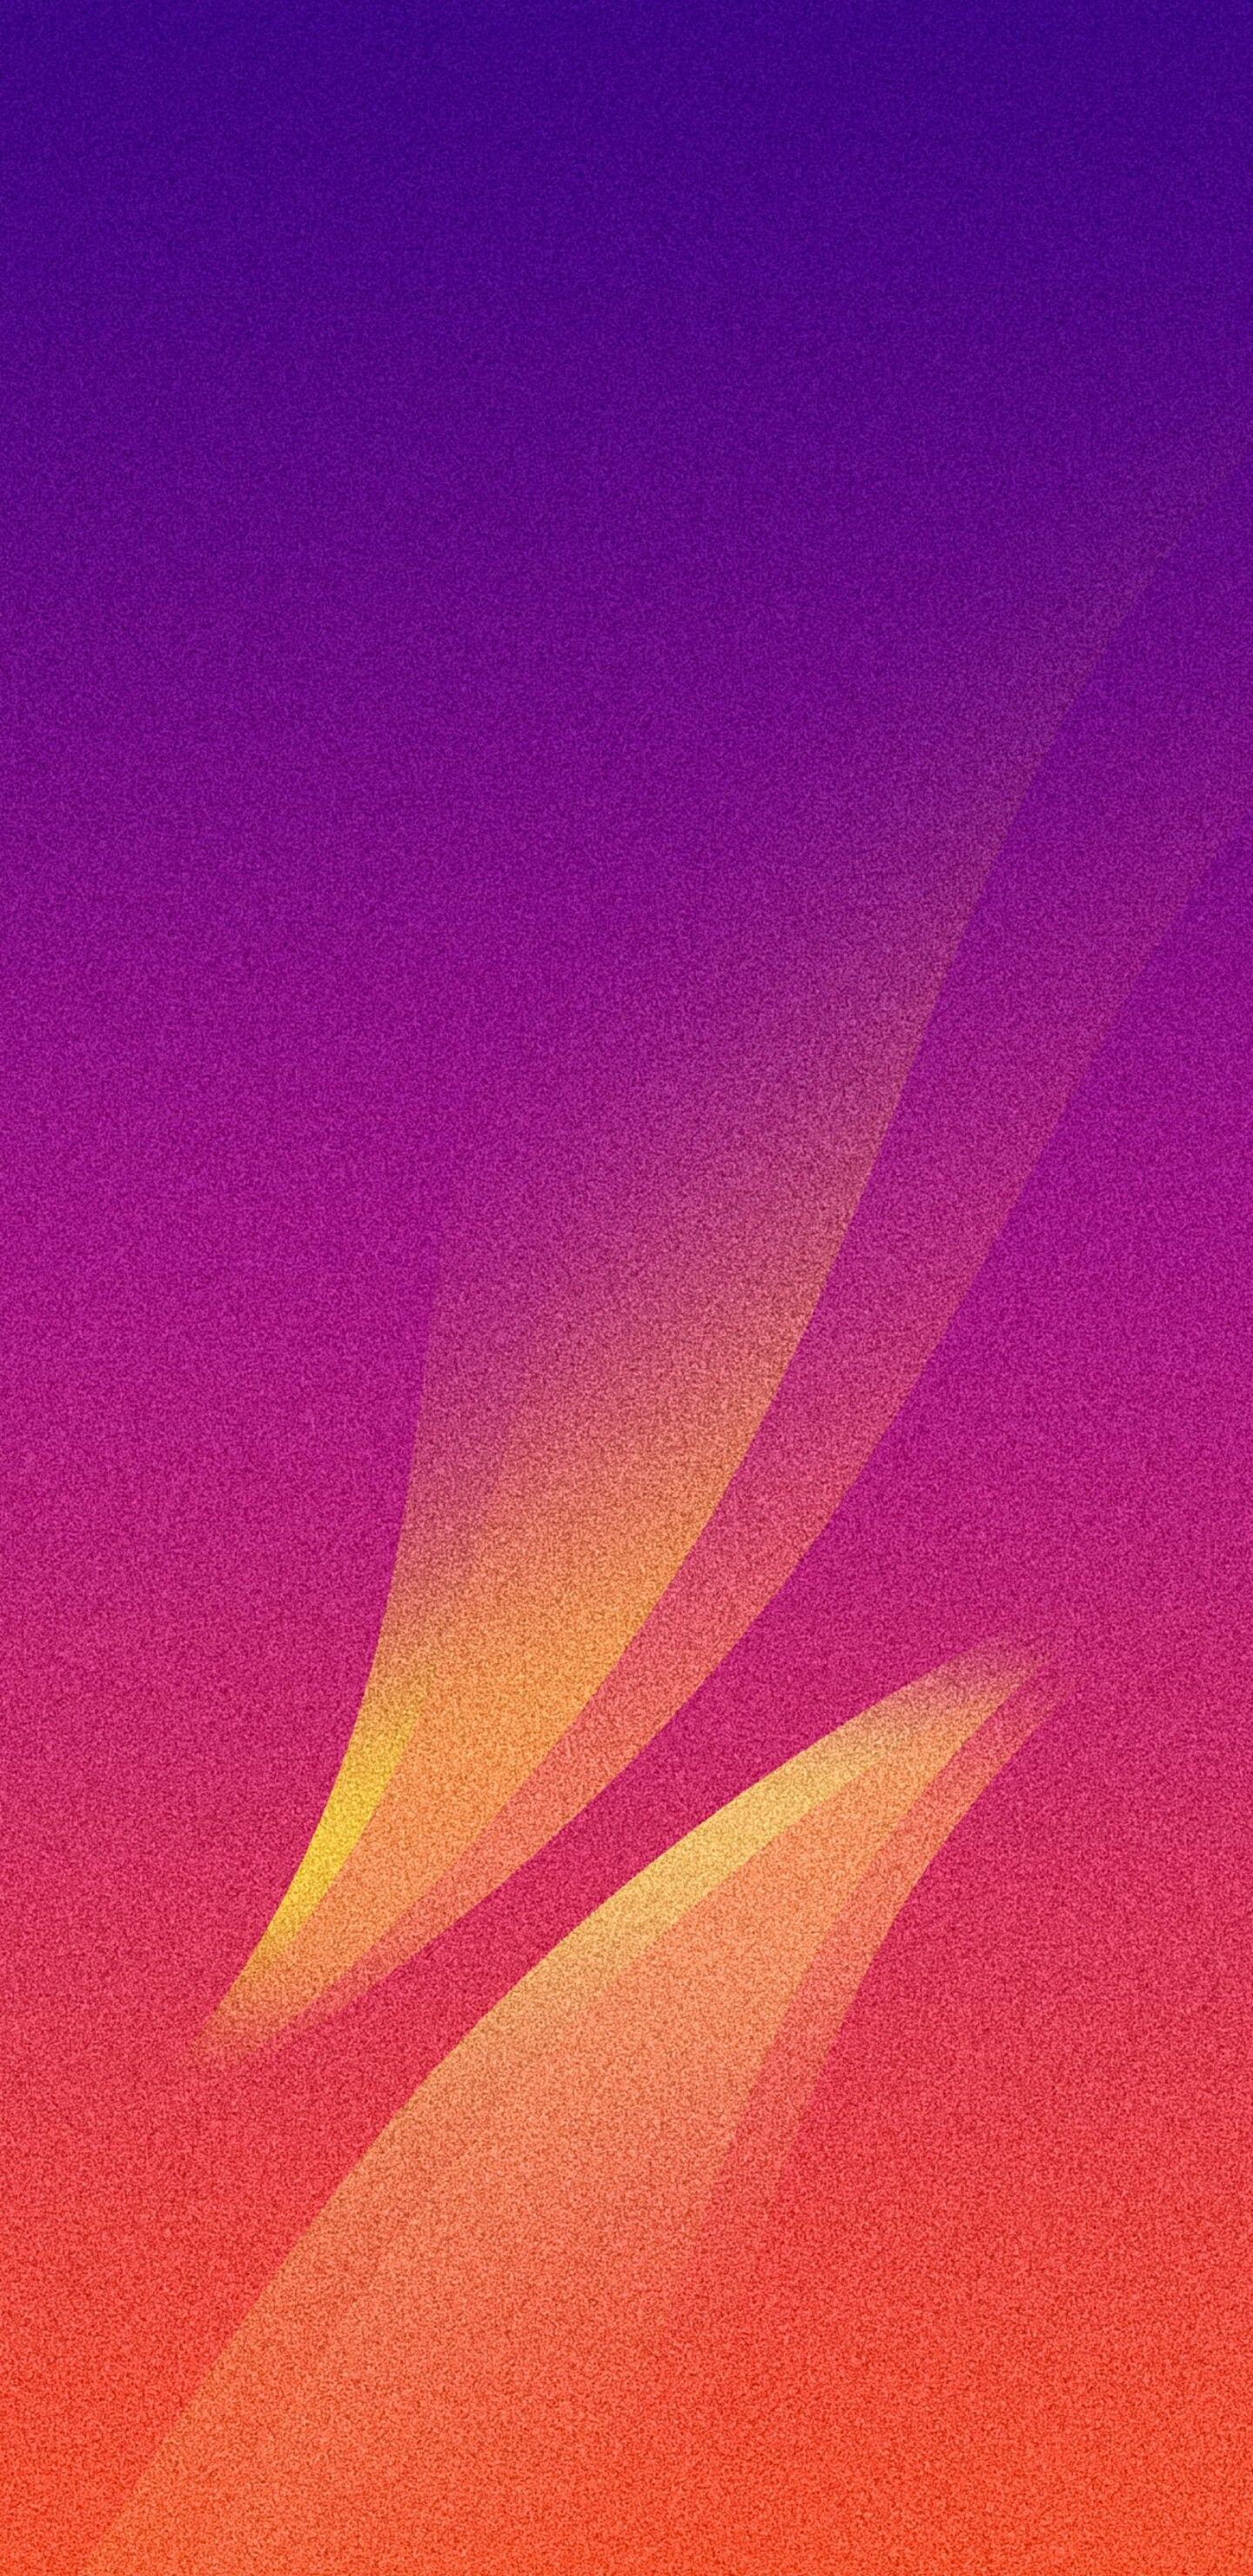 Samsung Galaxy Note 8 Wallpapers HD